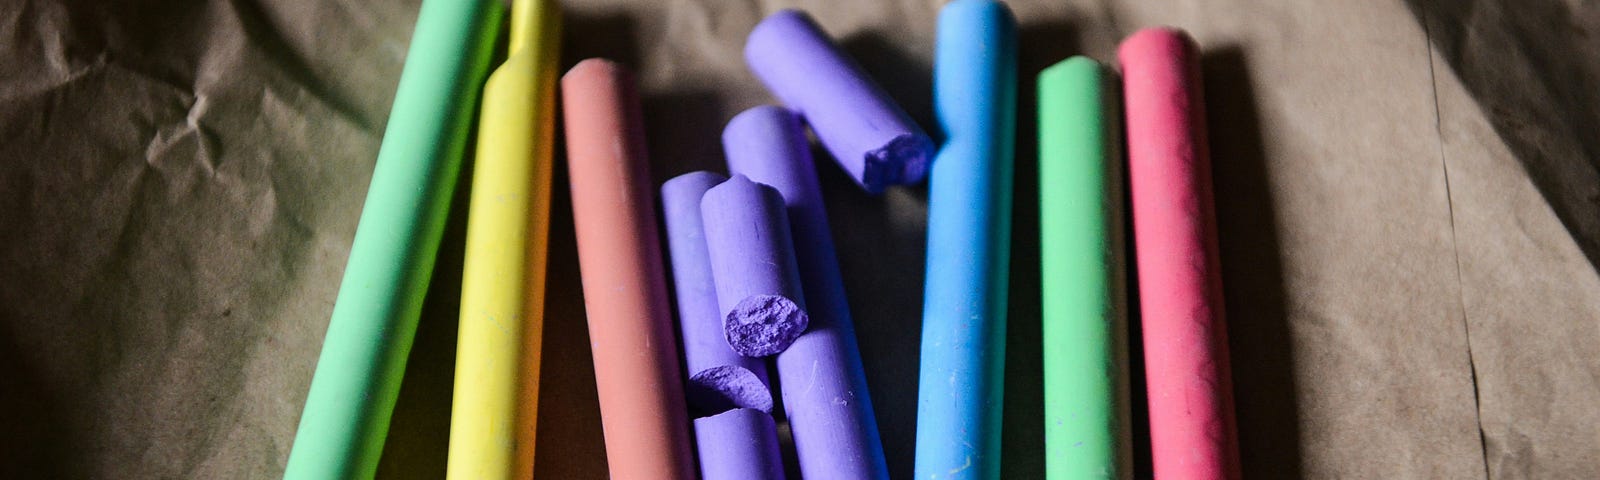 A set of rainbow-coloured chalk displayed on a brown paper. The purple chalk is broken into several pieces.